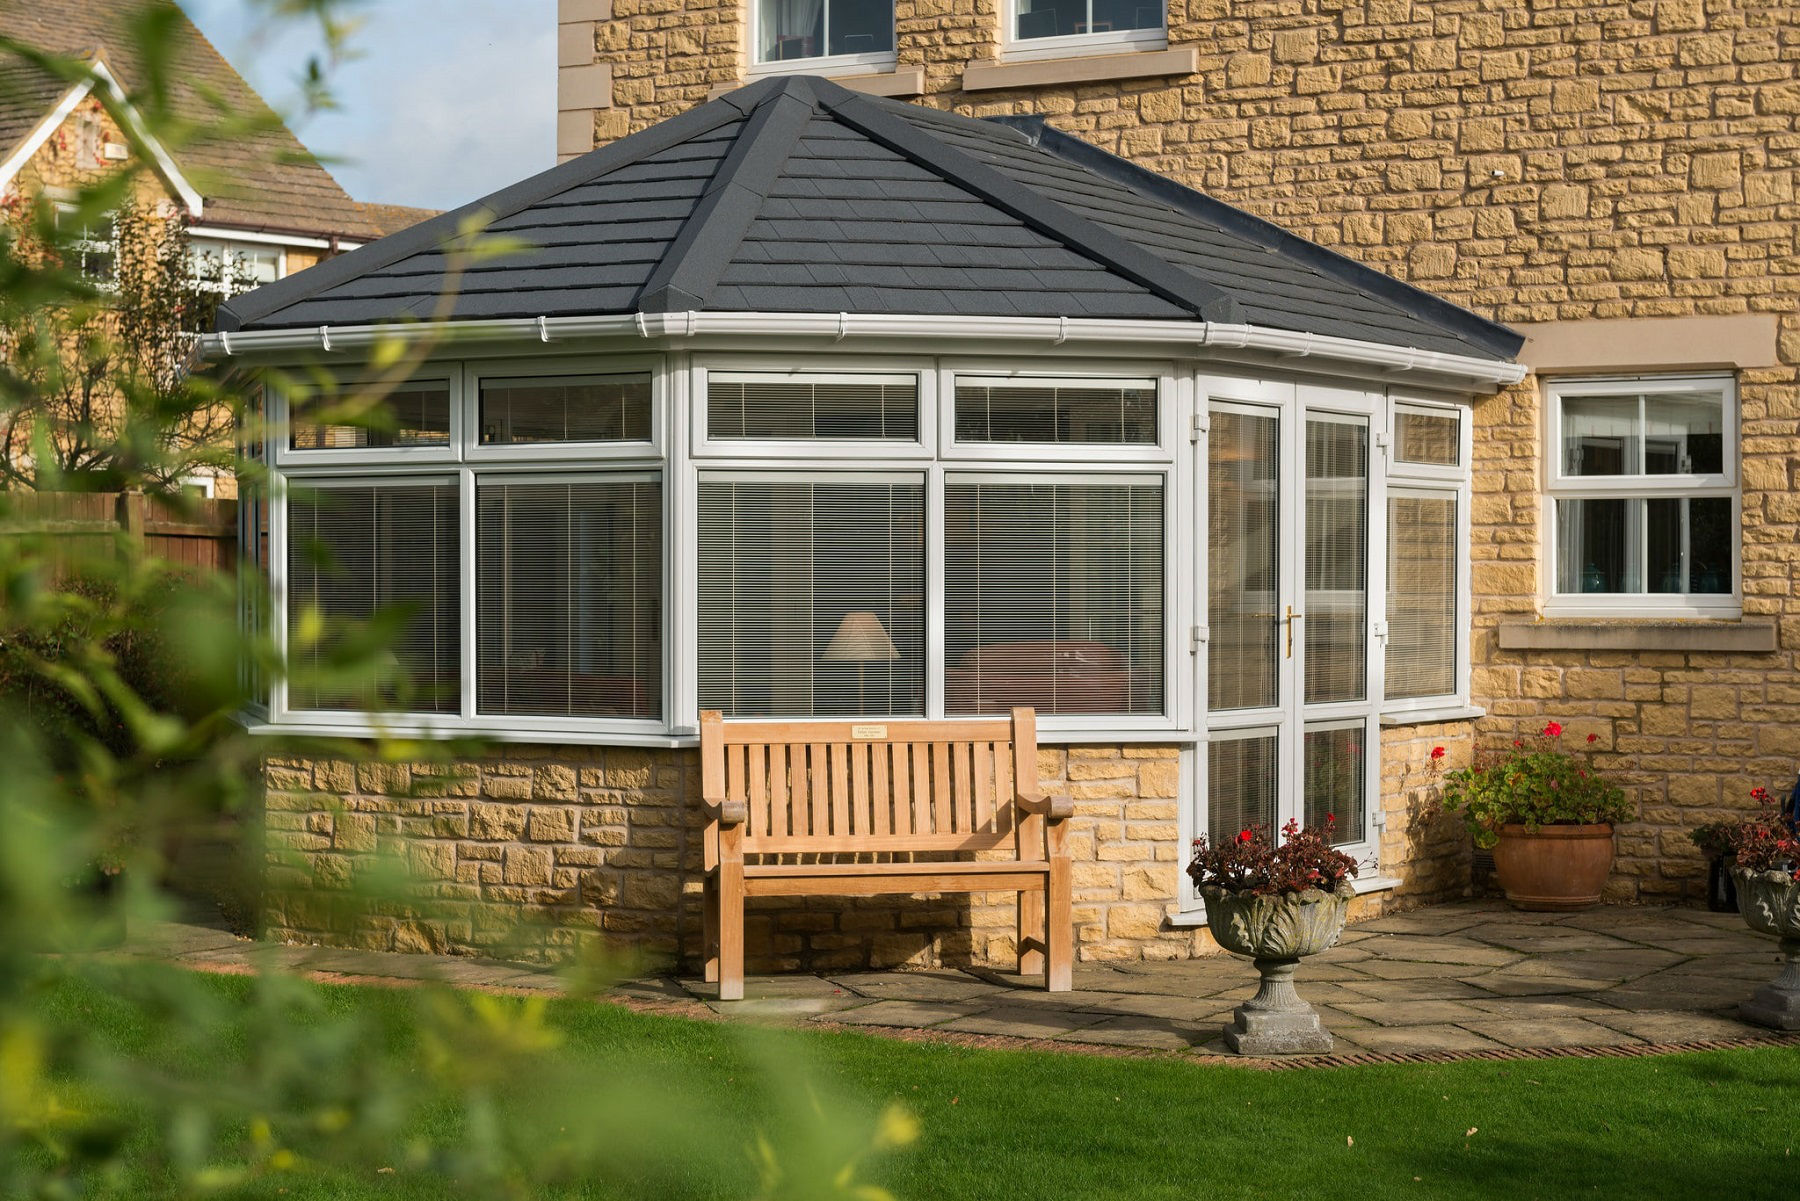 EYG's tiled conservatory roof